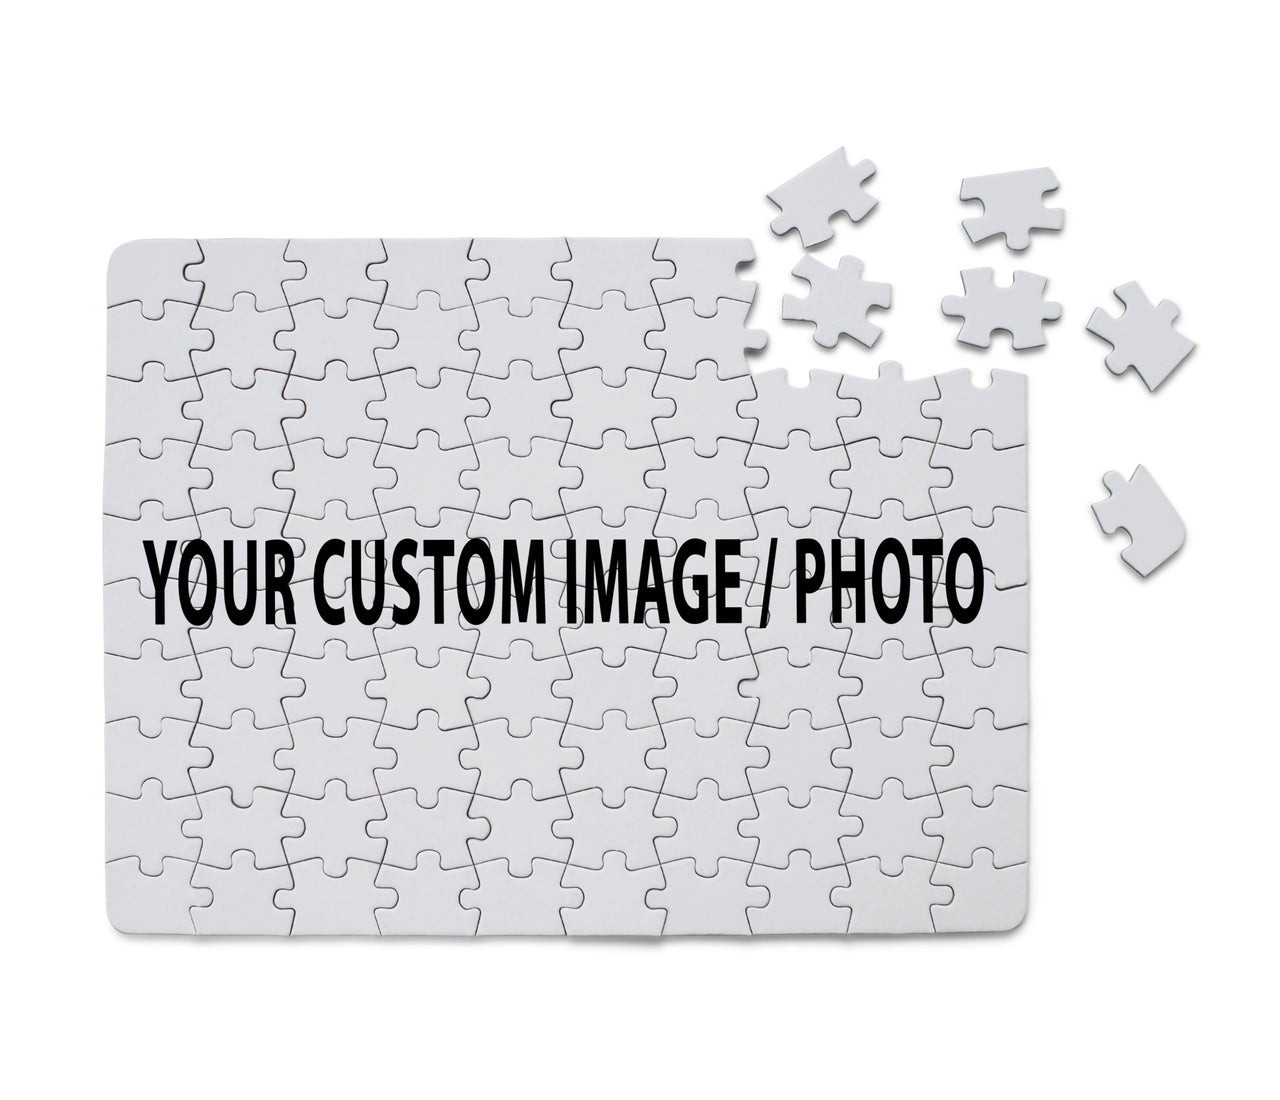 Your Custom Image / Photo Printed Puzzles Aviation Shop 